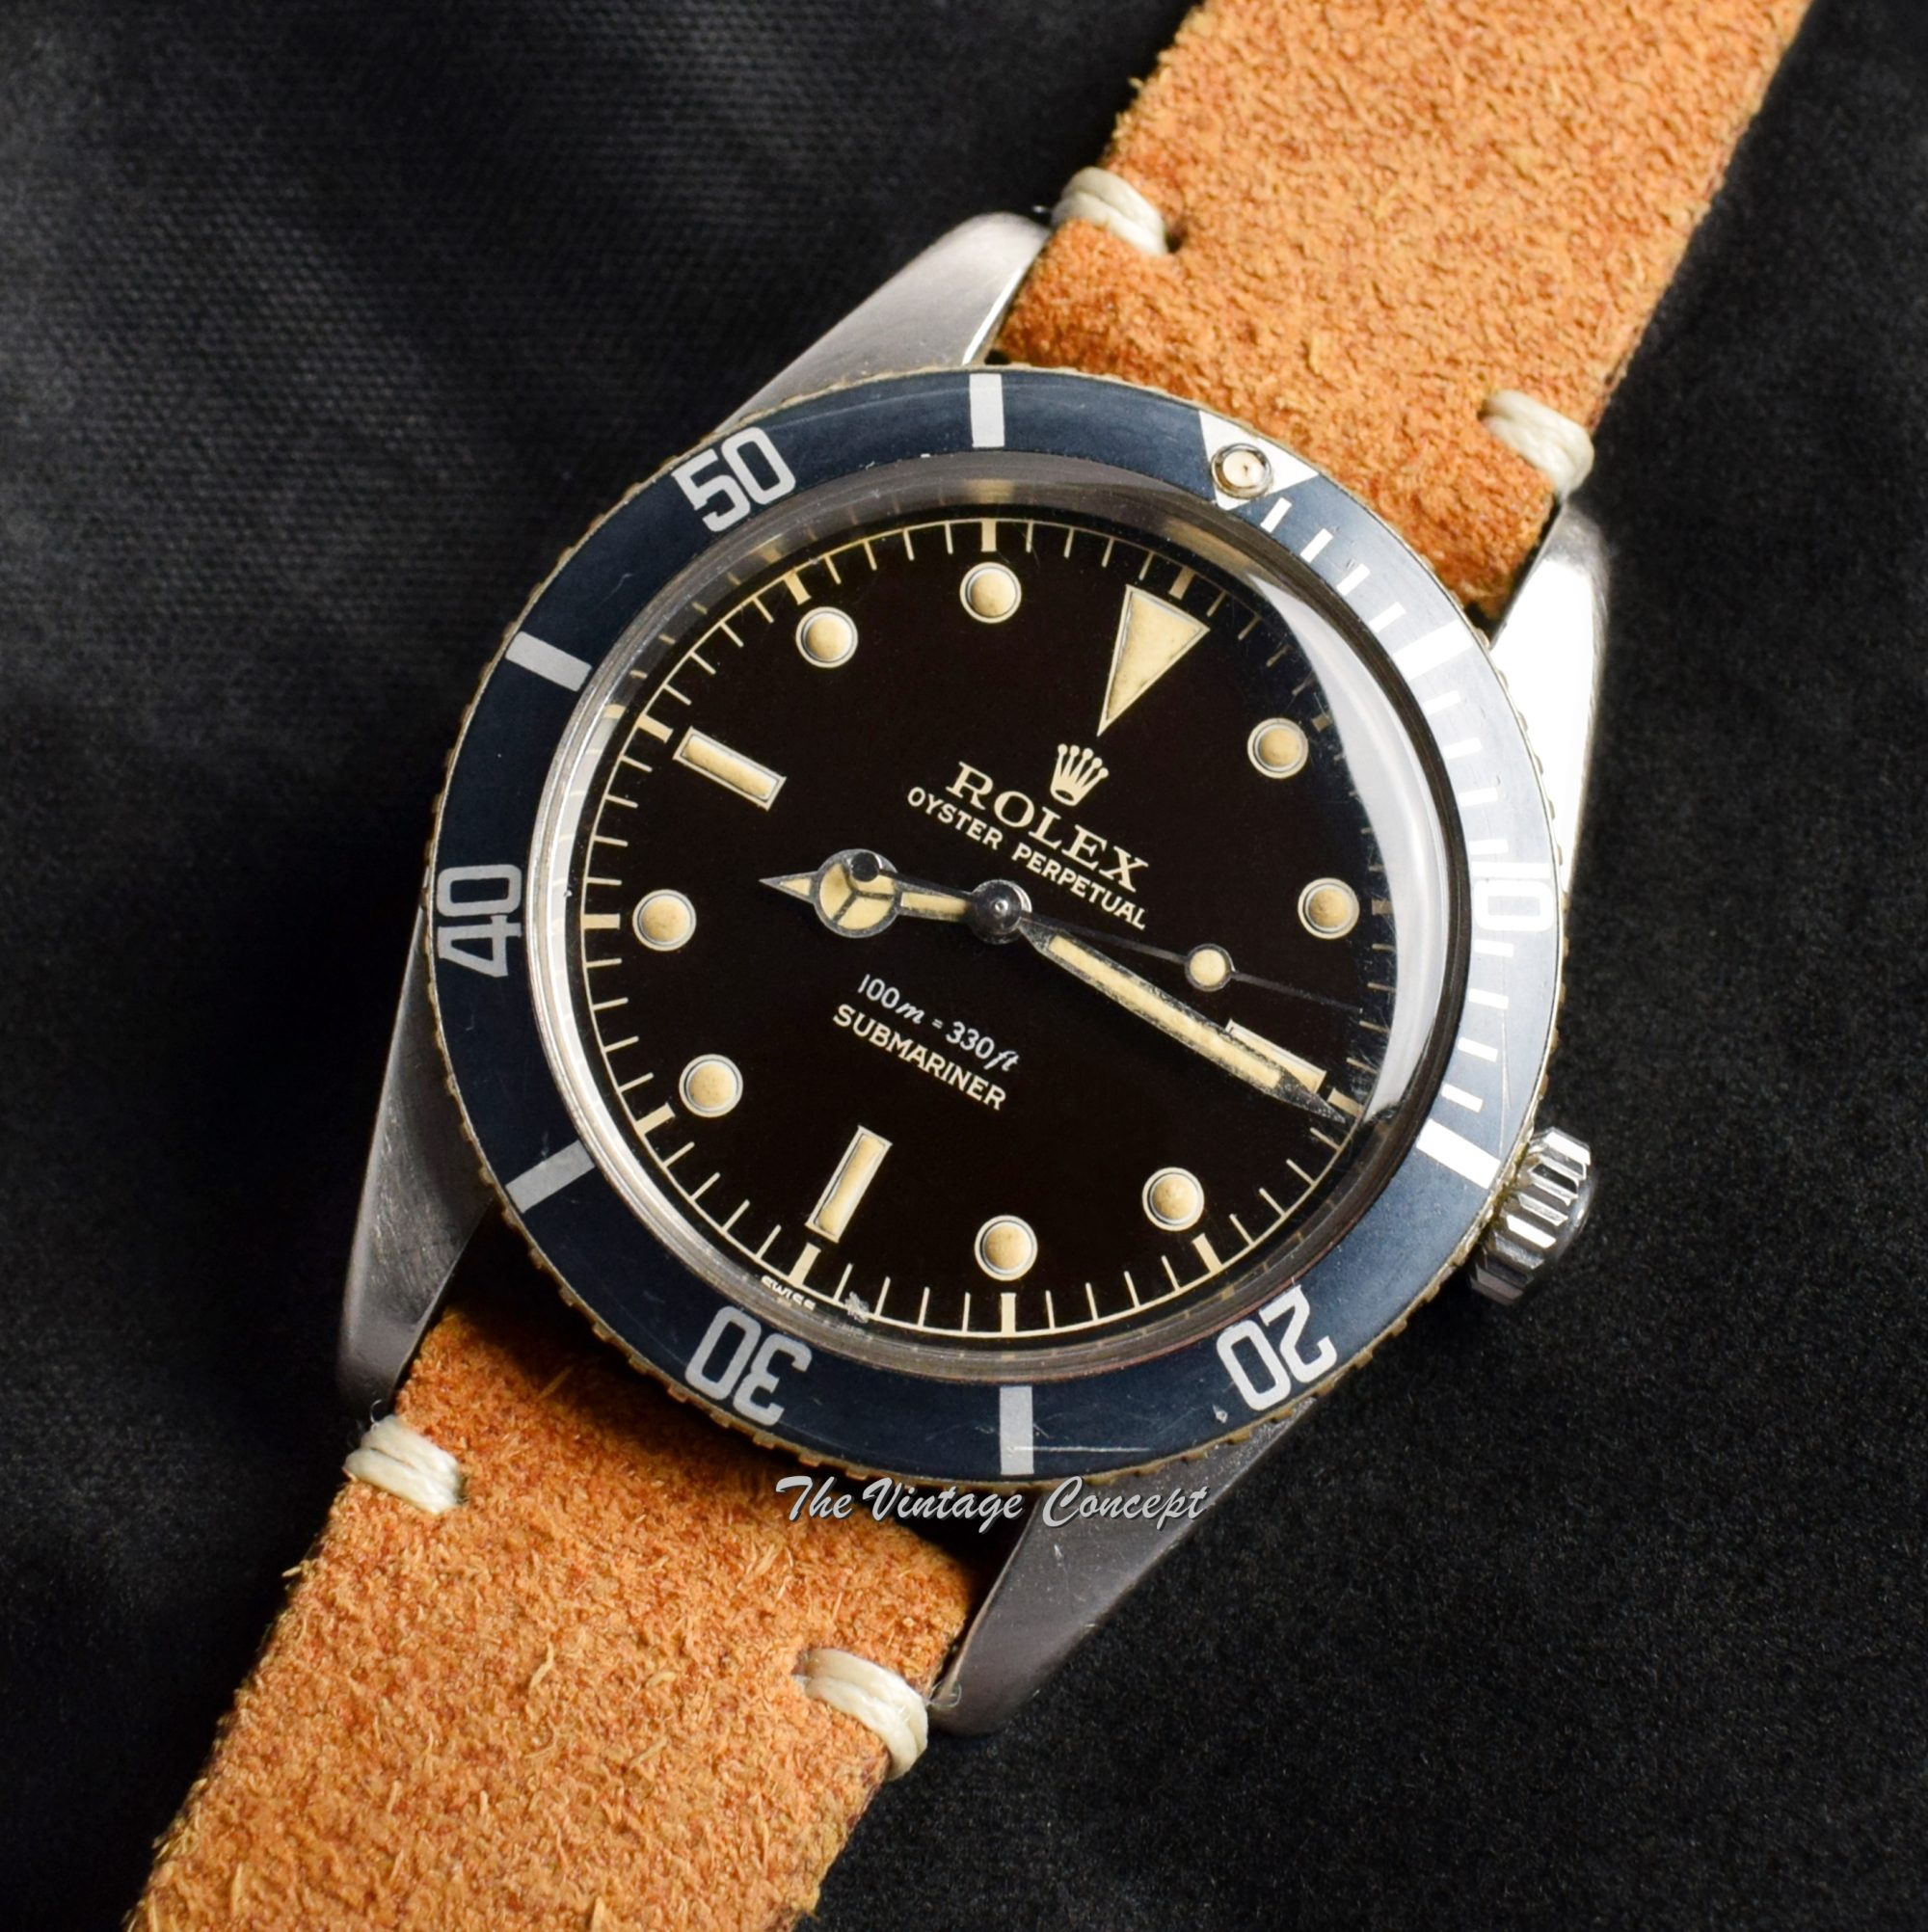 Rolex Submariner Small Crown Chocolate Gilt Dial 5508 w/ Original Paper (SOLD) - The Vintage Concept